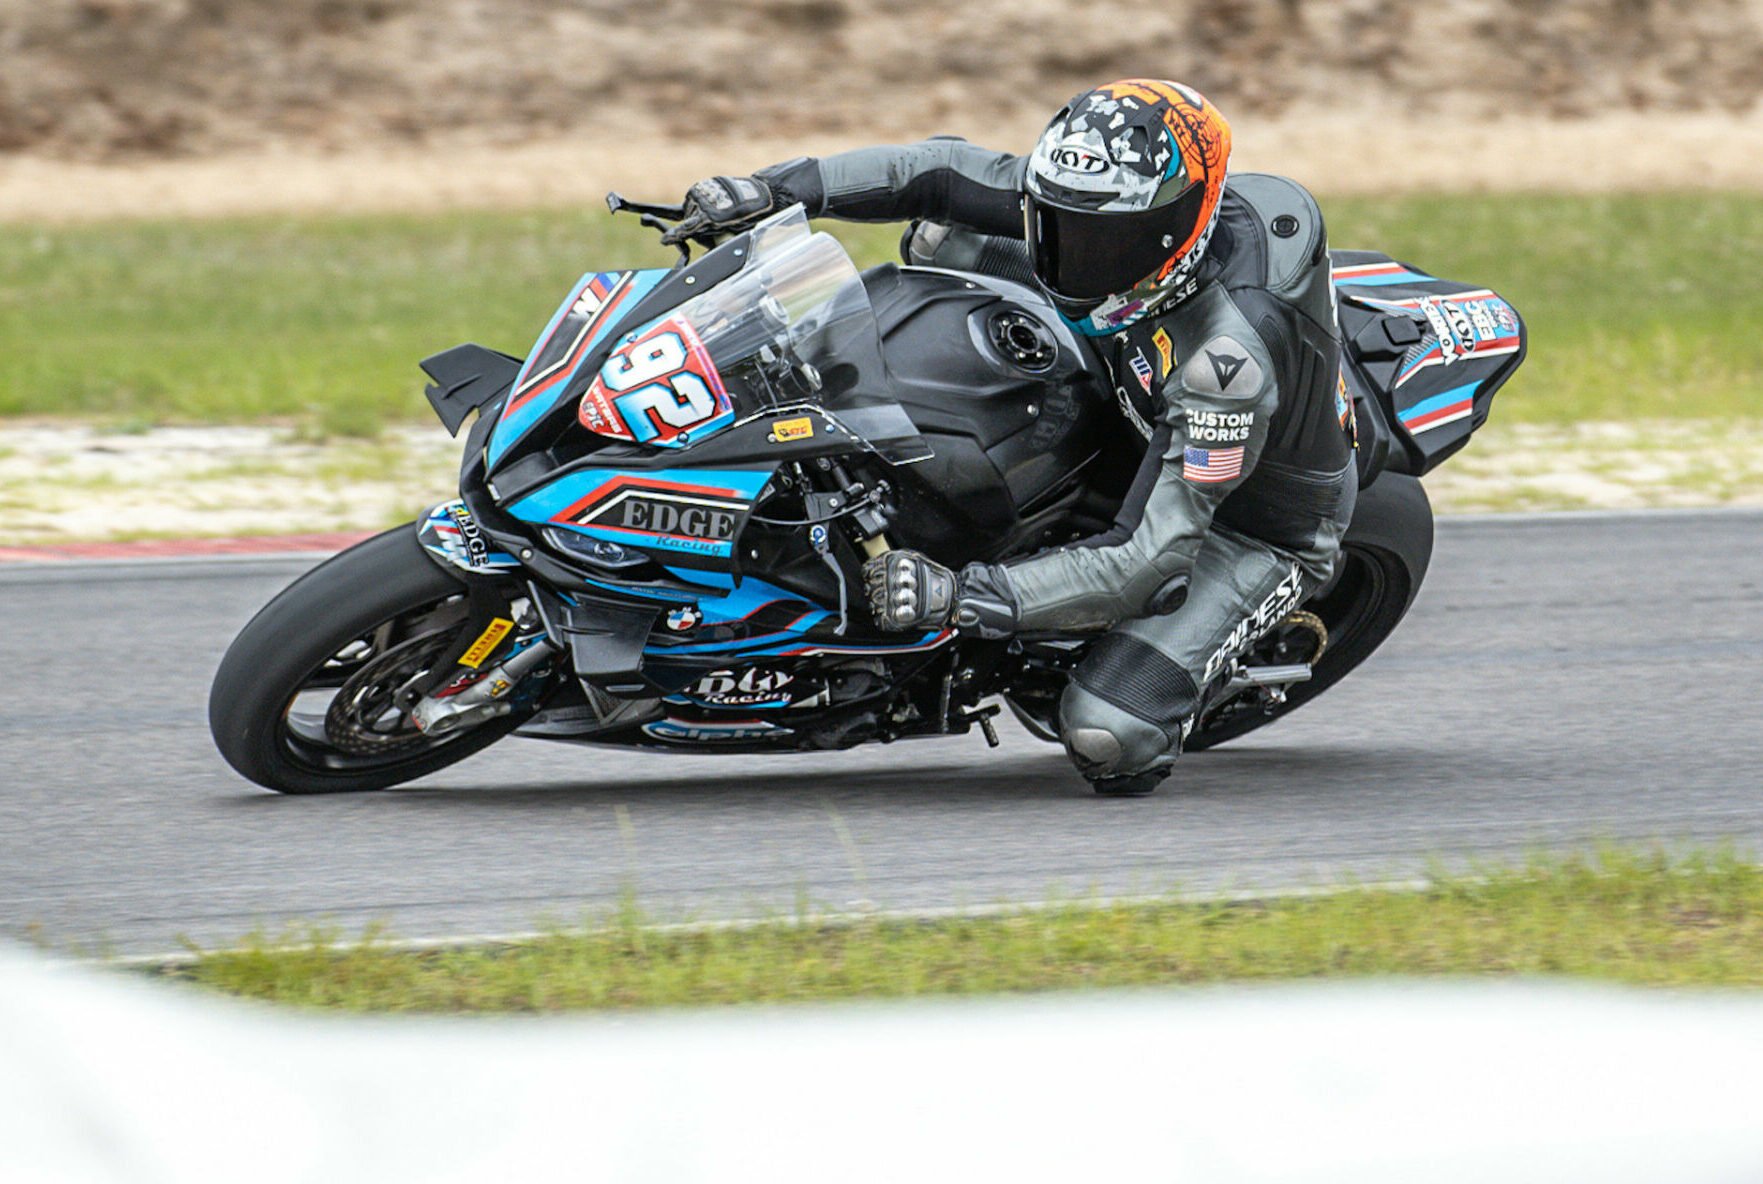 Jason Waters (92) set a new lap record of 1:09.897 at Roebling Road Raceway. Photo by Motorsport Photo LLC, courtesy Pirelli.